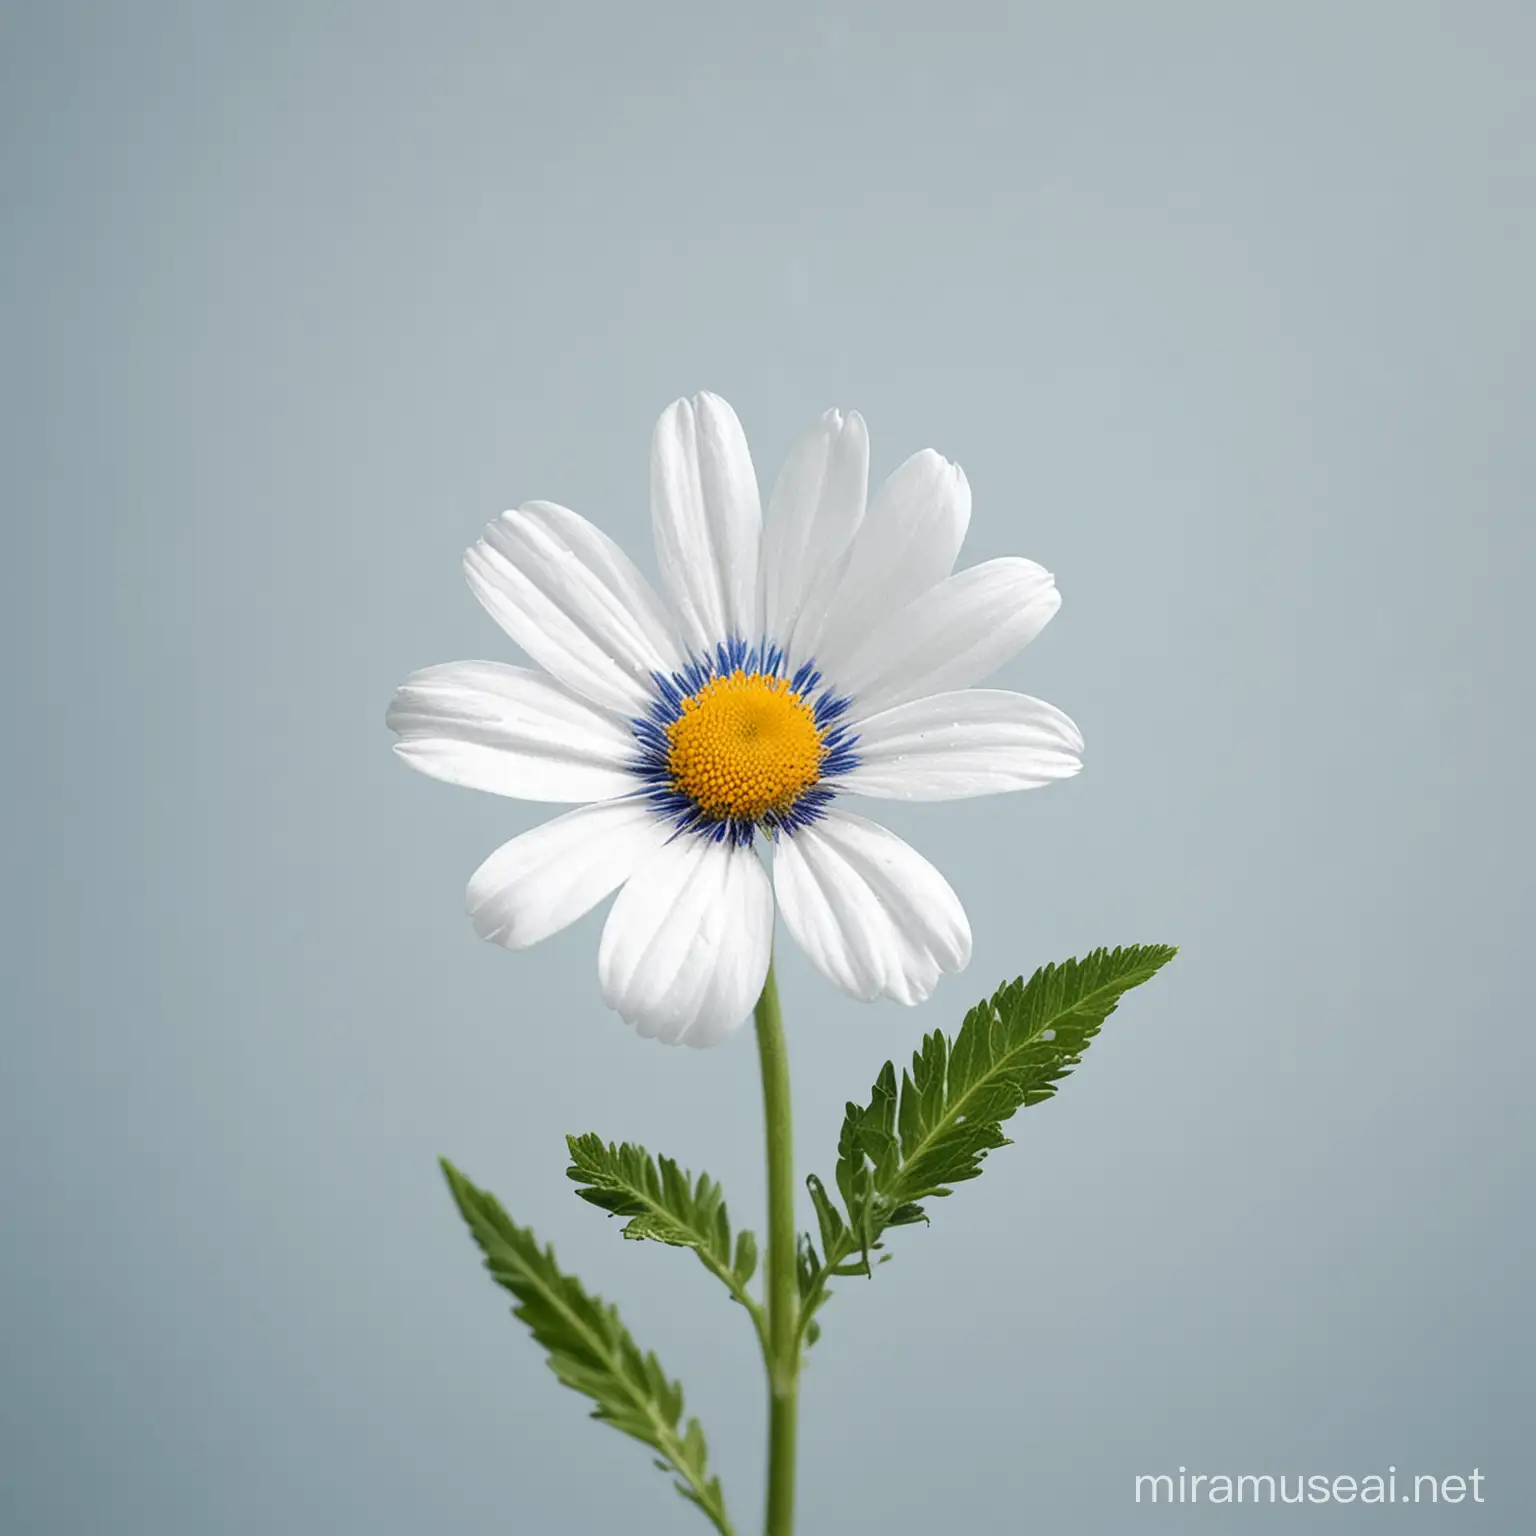 Vibrant Wild Flowers on a Serene Blue and White Background